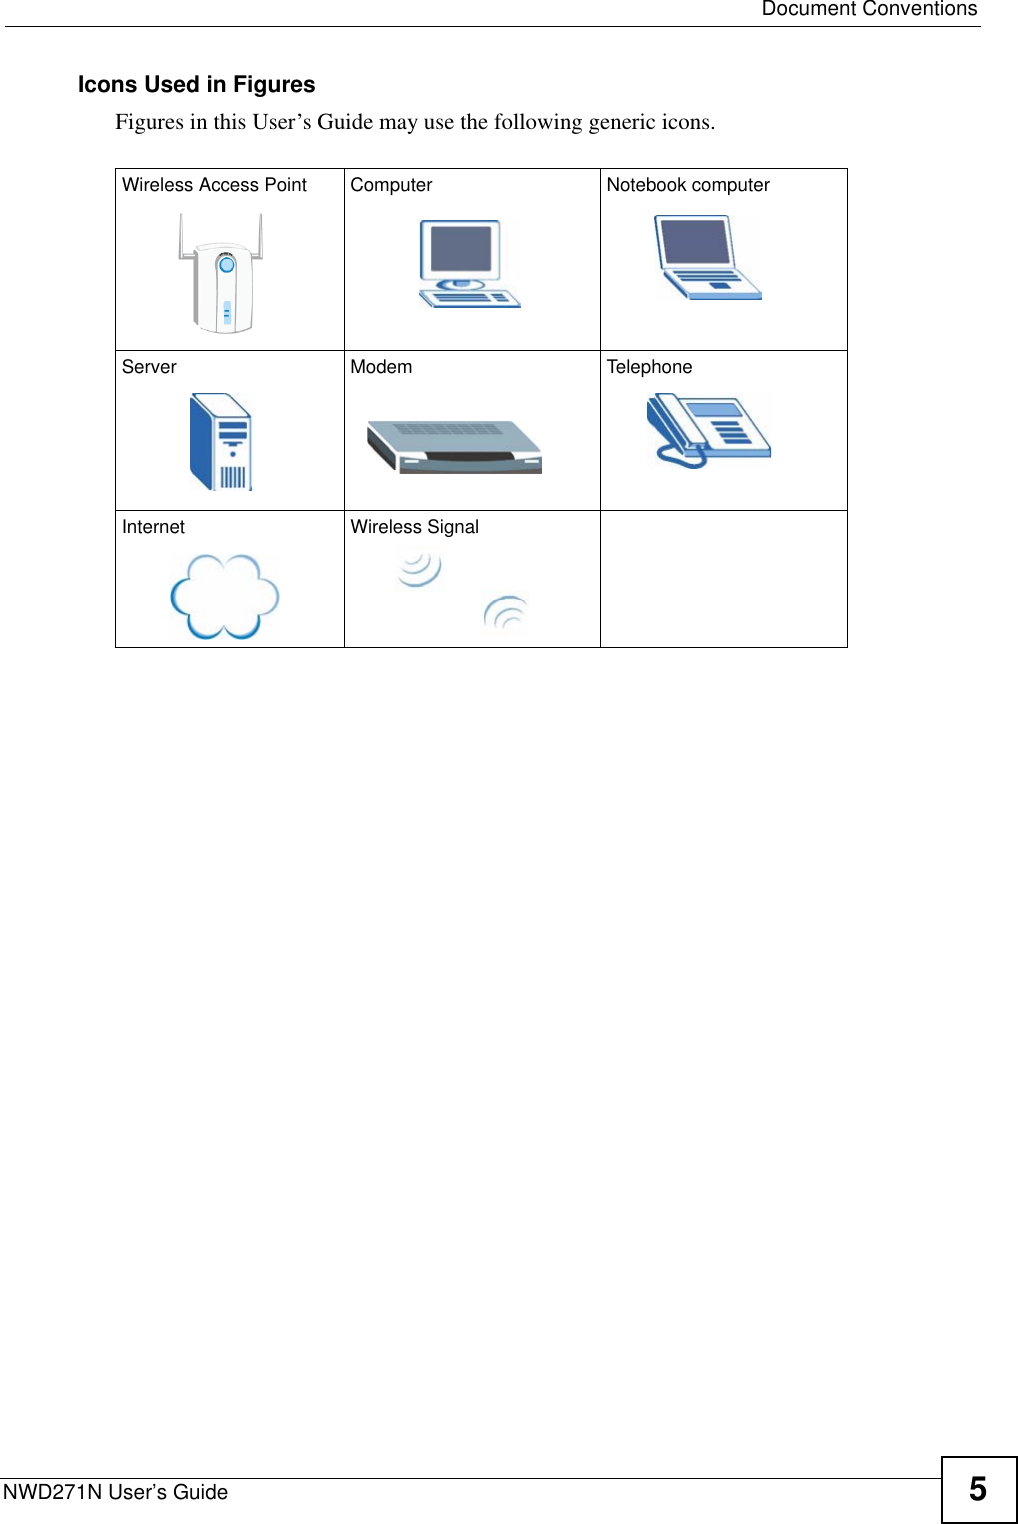  Document ConventionsNWD271N User’s Guide 5Icons Used in FiguresFigures in this User’s Guide may use the following generic icons. Wireless Access Point Computer Notebook computerServer Modem TelephoneInternet Wireless Signal